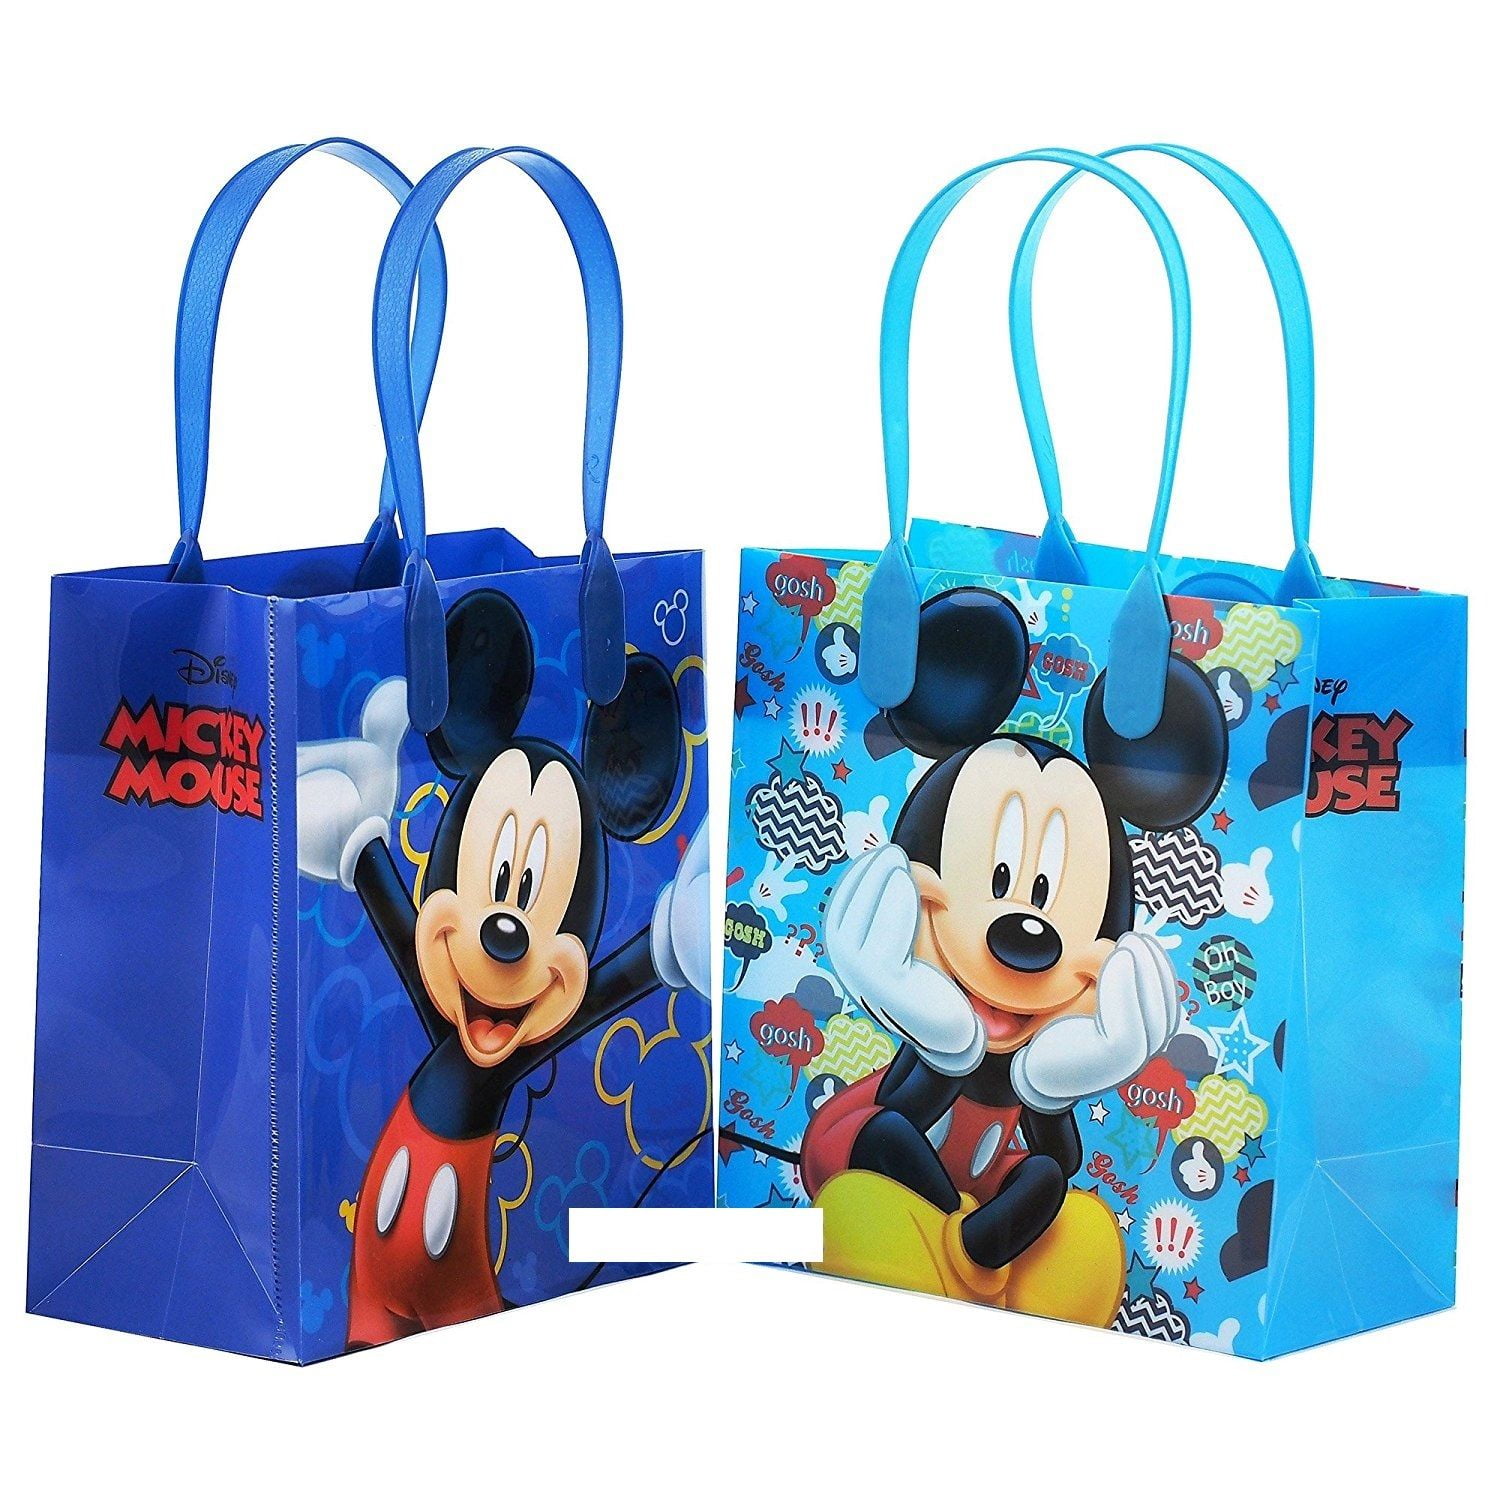 Mickey & Friends DISNEY REUSABLE TOTE GROCERY SHOPPING GIFT PARTY BAG 